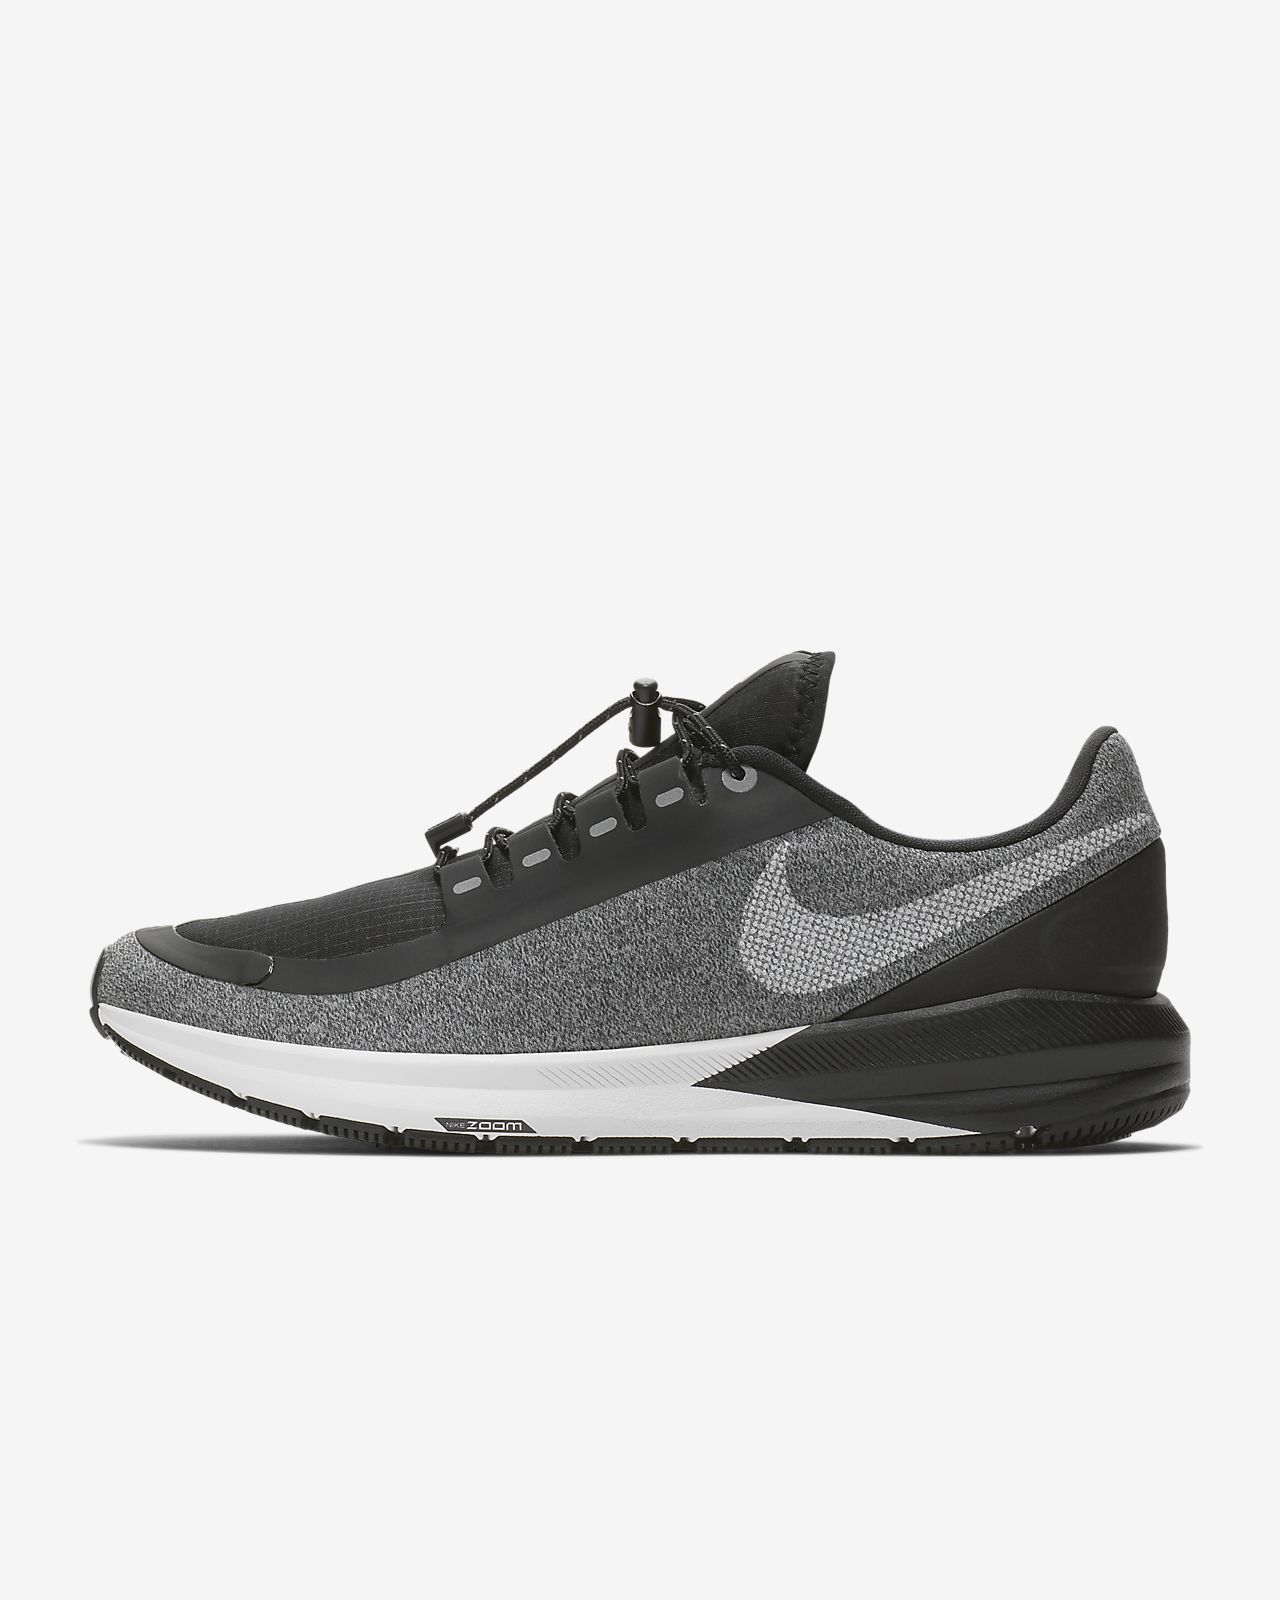 Chaussure de running Nike Air Zoom Structure 22 Shield Water-Repellent pour Femme. Nike.com FR | Nike FR